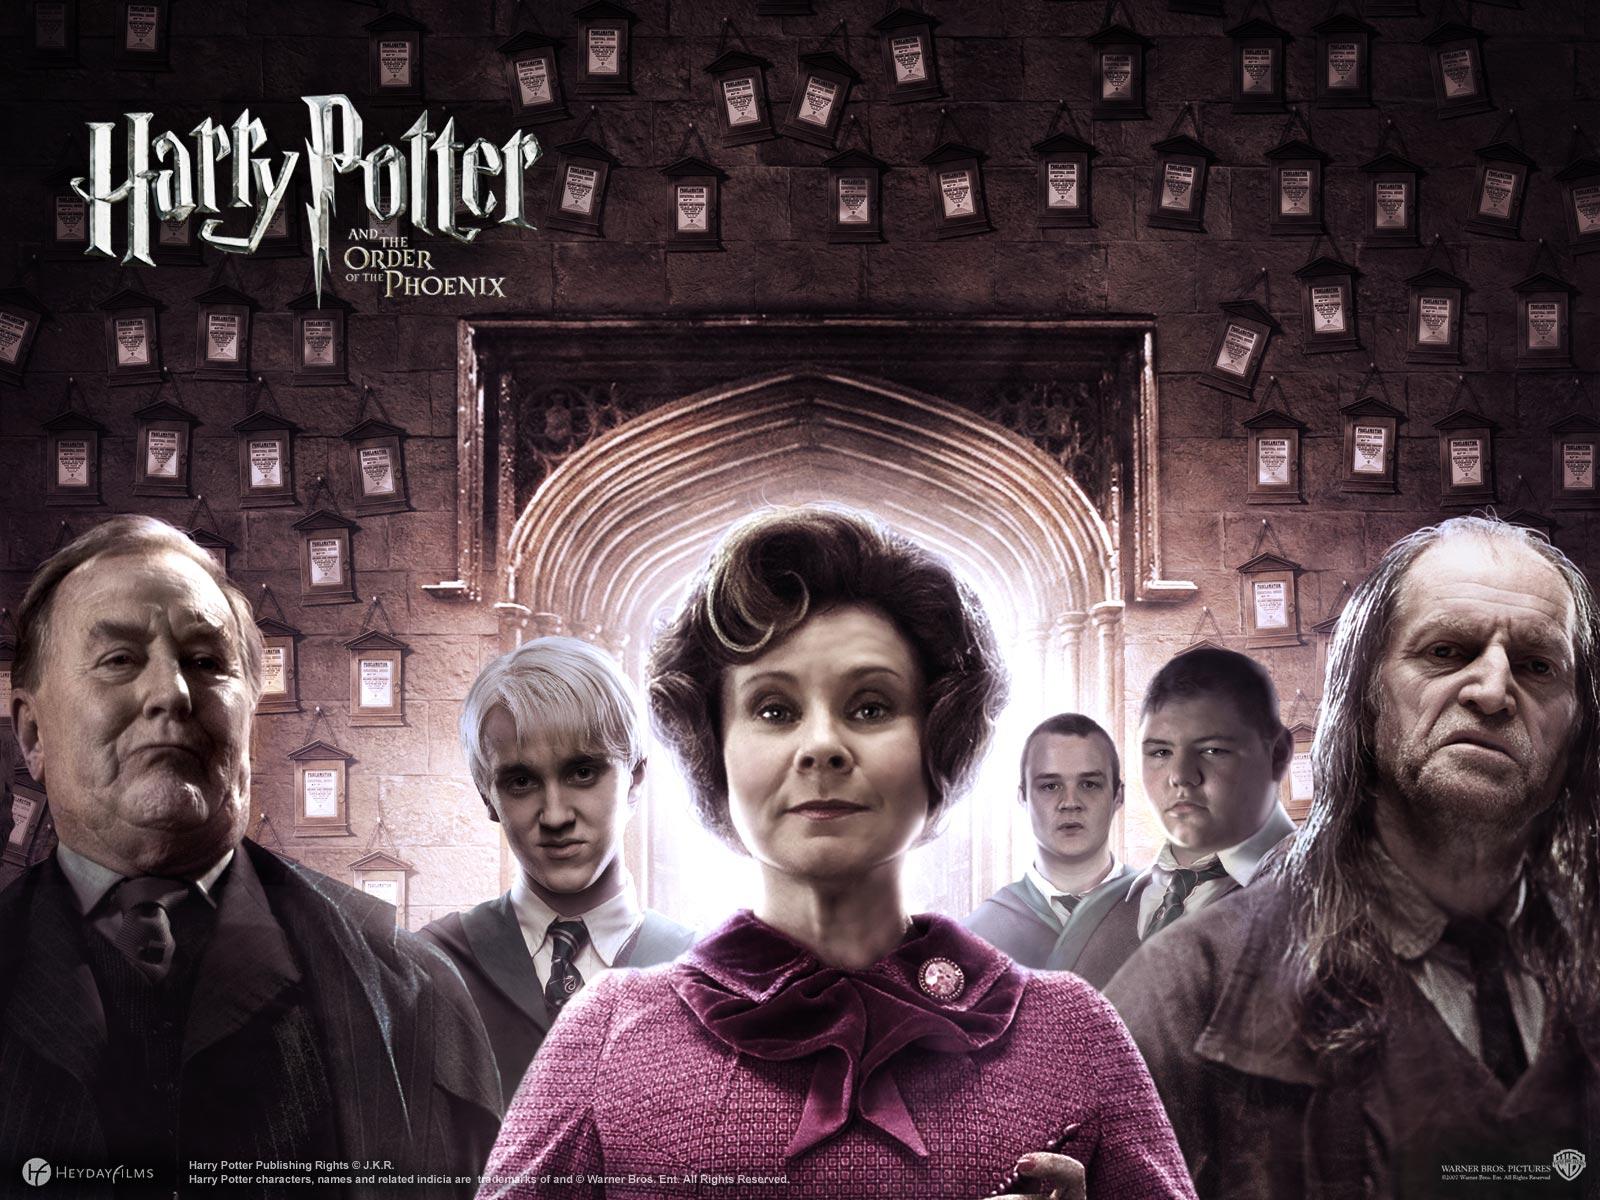 Movies_Movies_H_Harry_Potter_and_Order_of_Phoenix_009965_